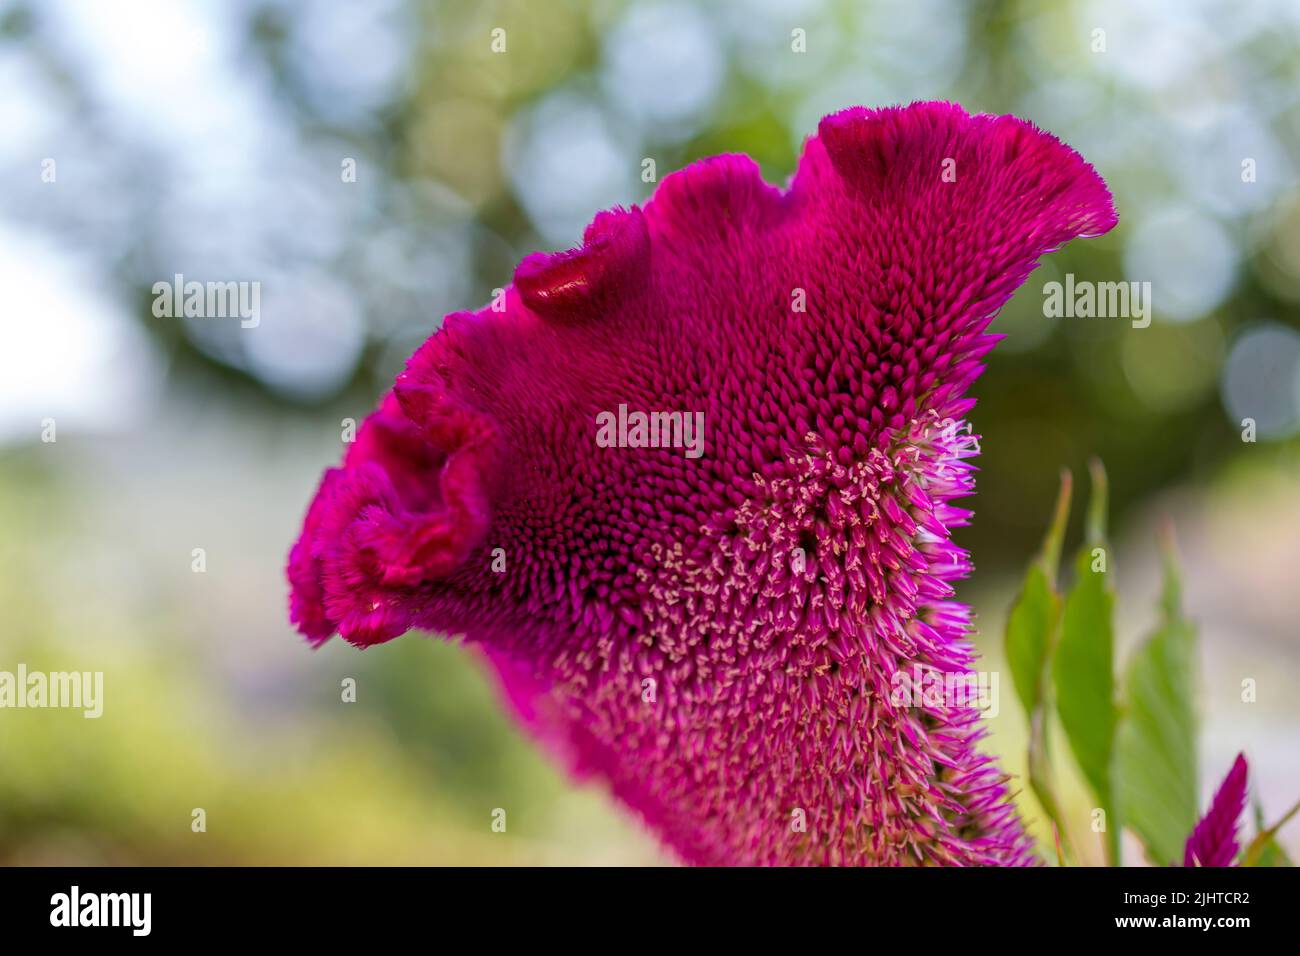 Celosia argentea, commonly known as the plumed cockscomb or silver cock's comb, is a herbaceous plant of tropical origin, and is known for its very br Stock Photo